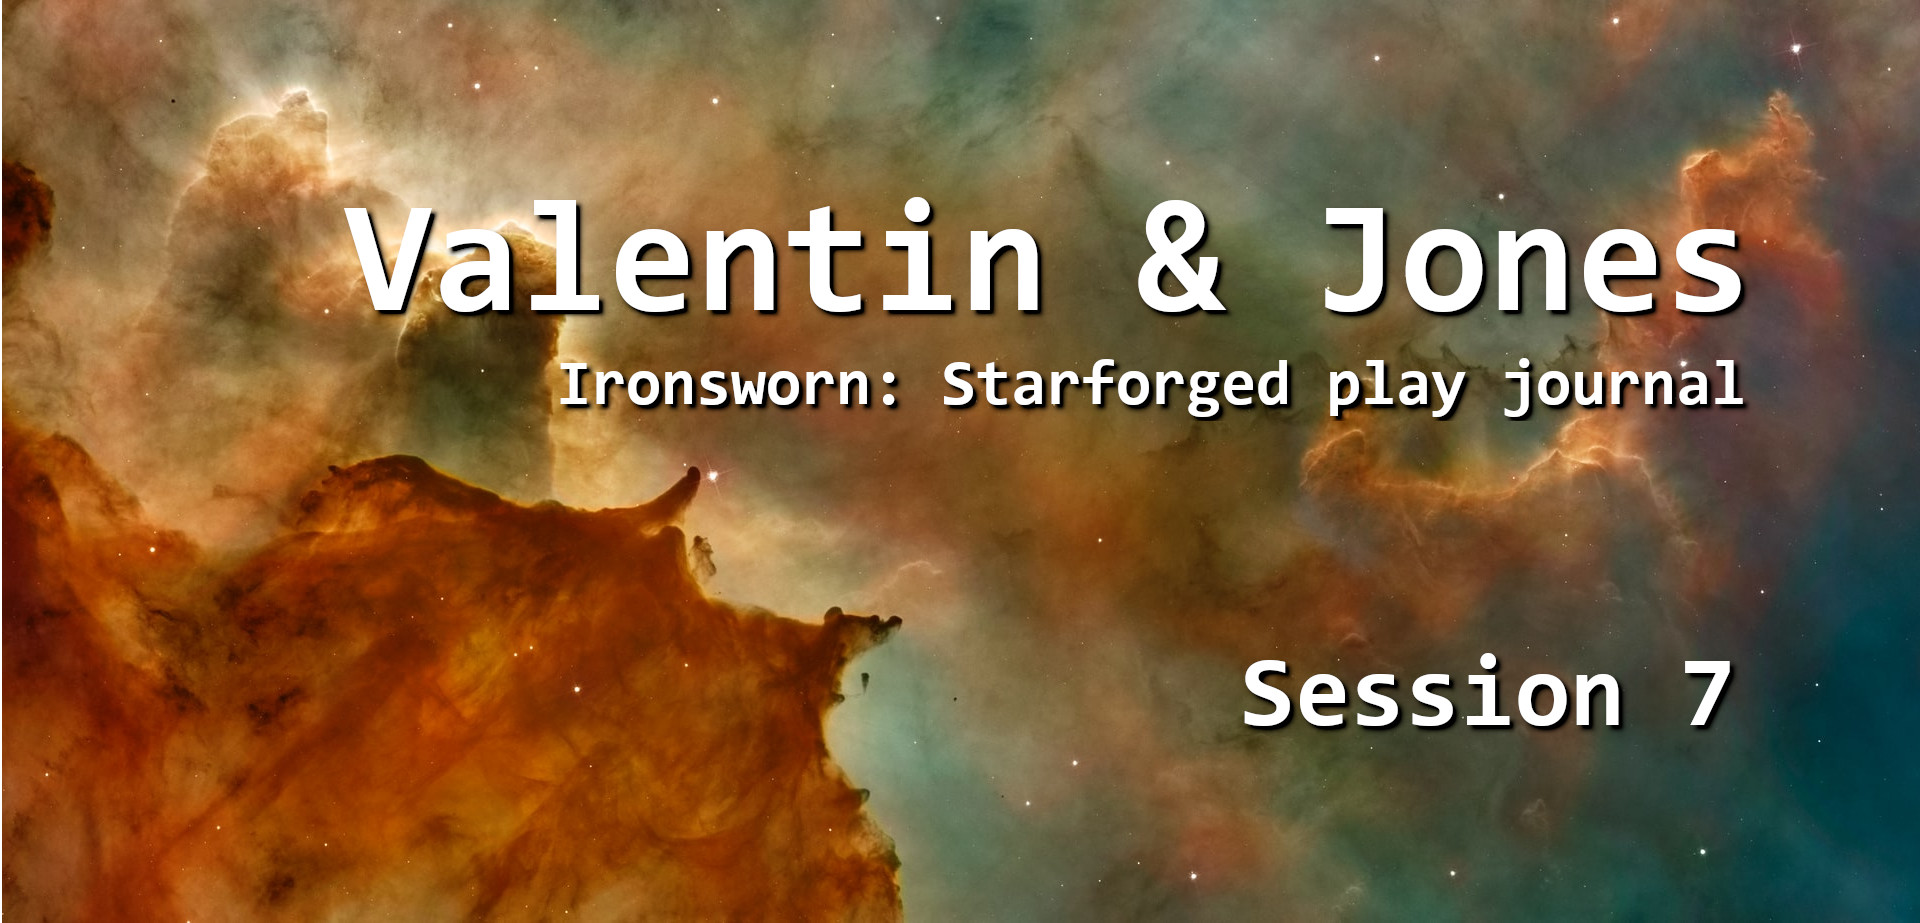 Valentin & Jones, Session 7, Starforged actual play journal